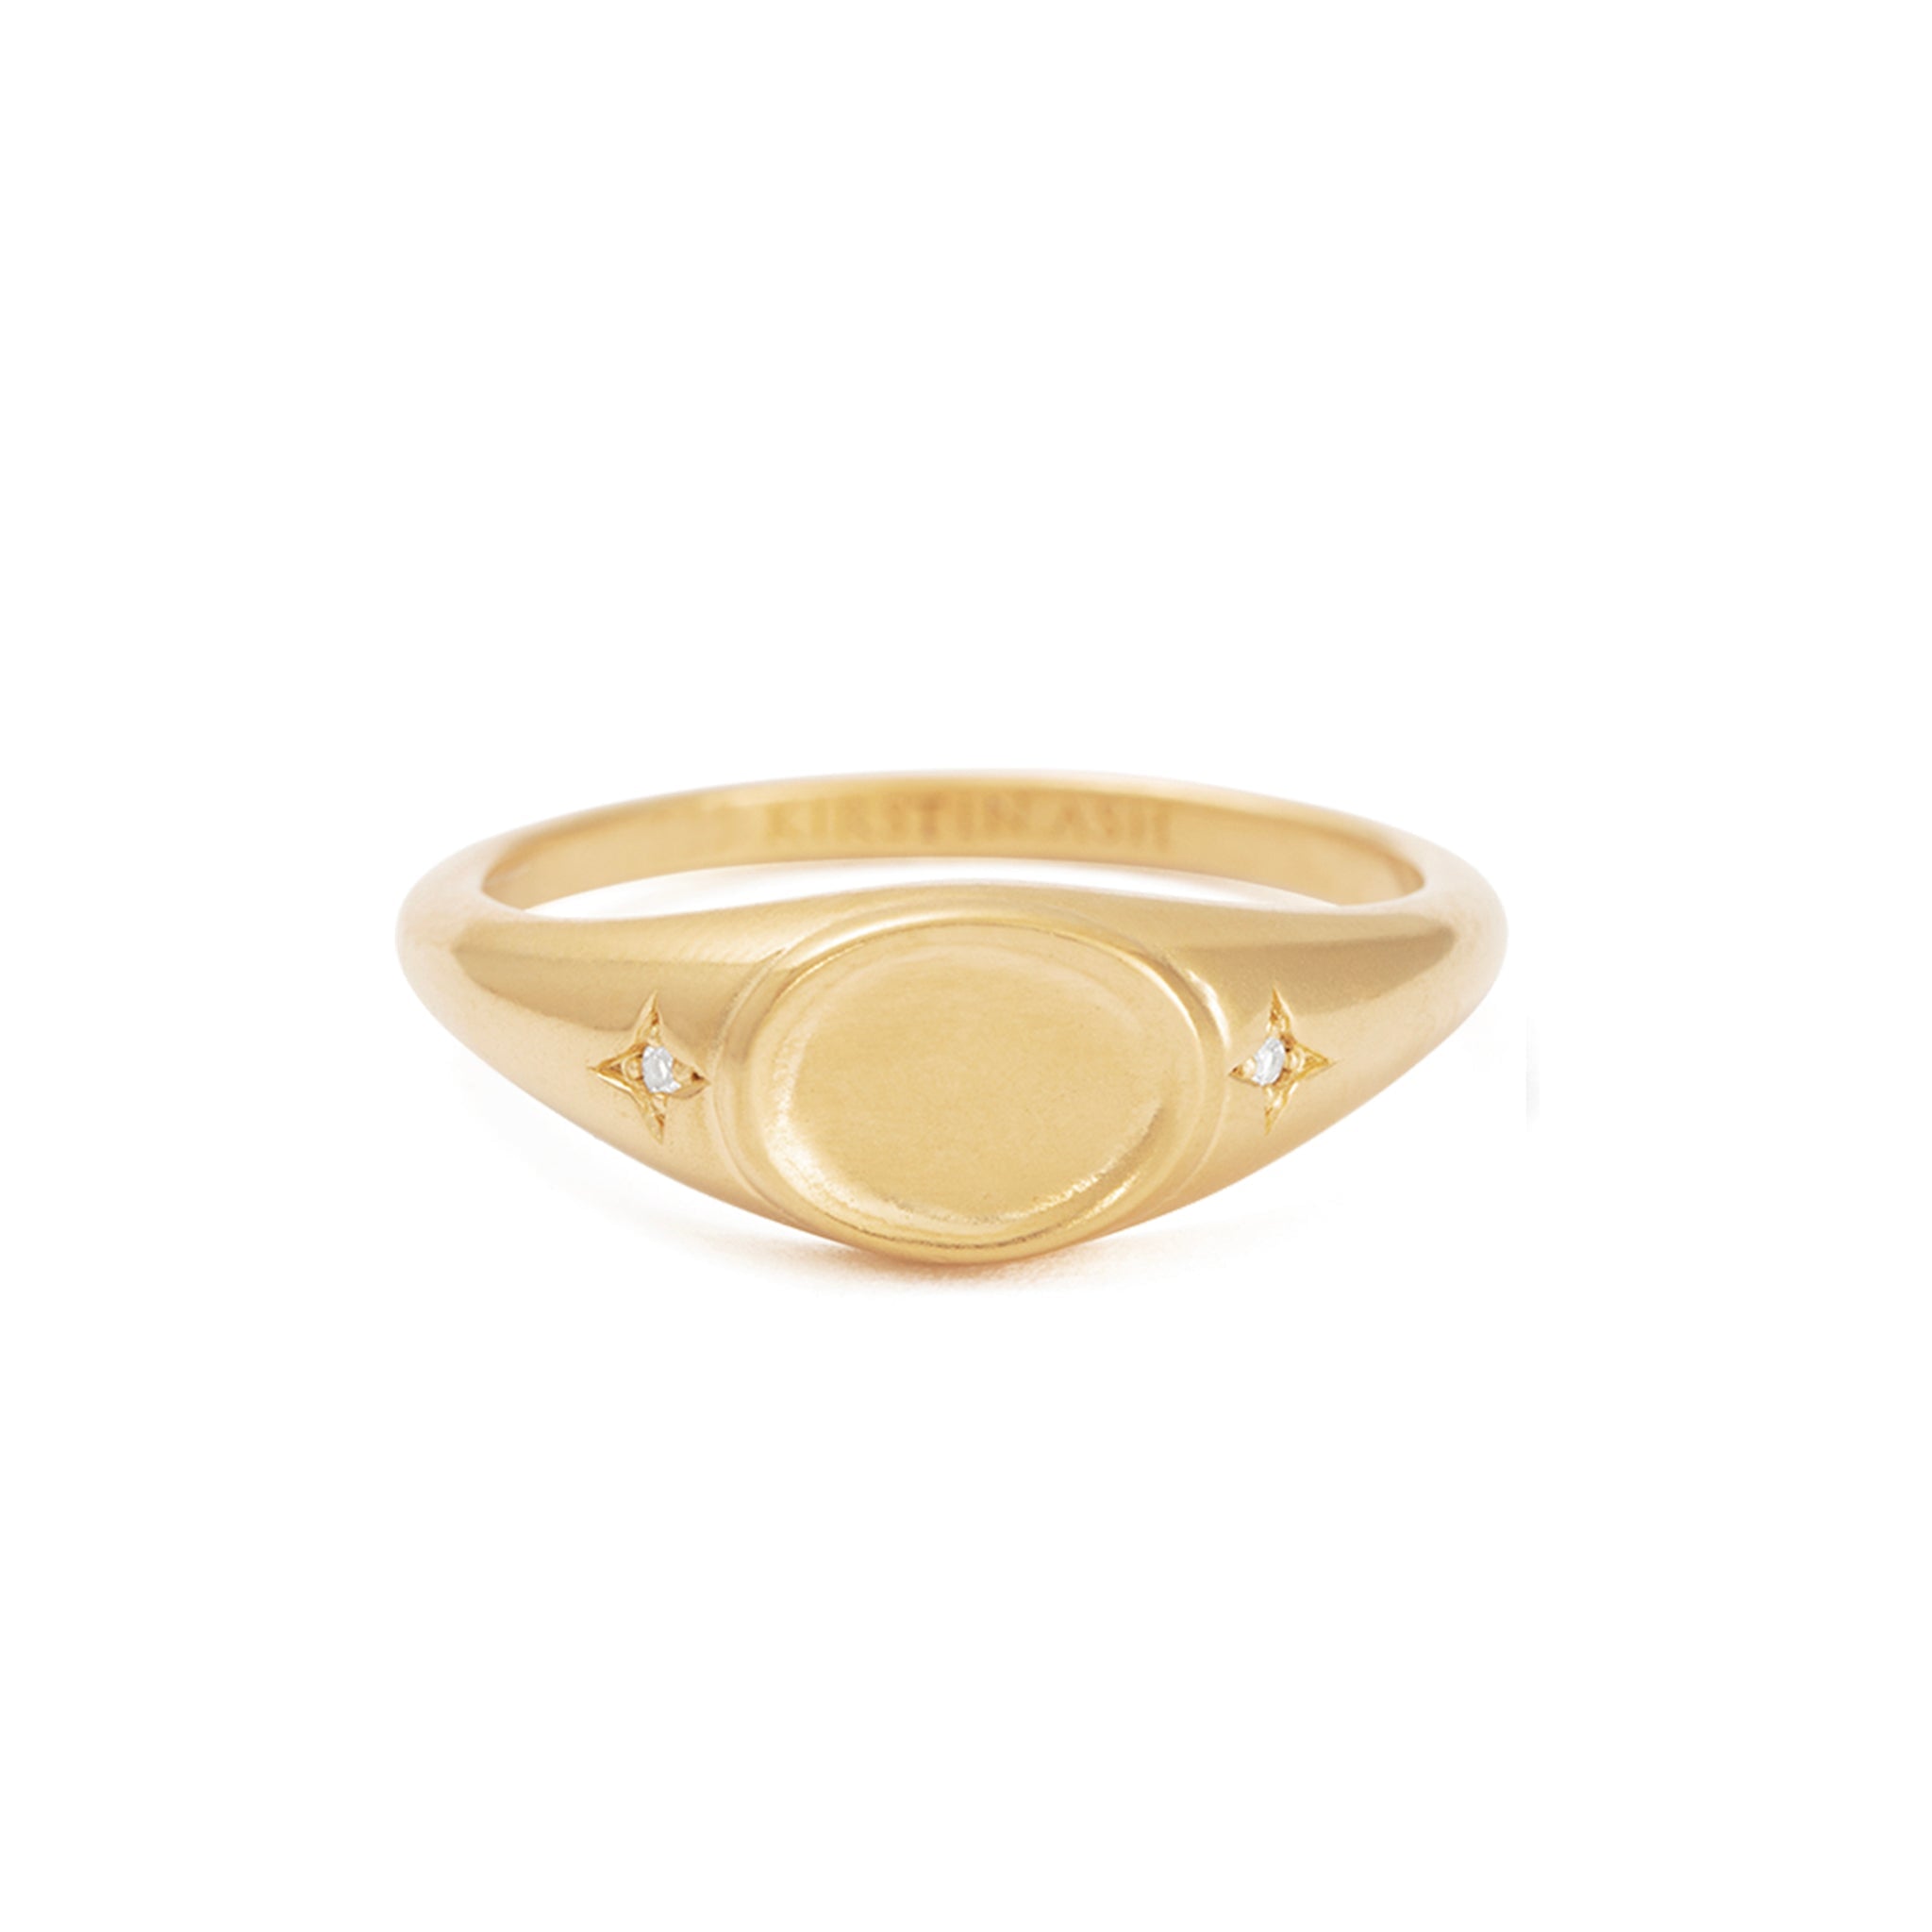 Kirstin Ash Eclipse Collection Signet Ring - Align - Tea Pea Home